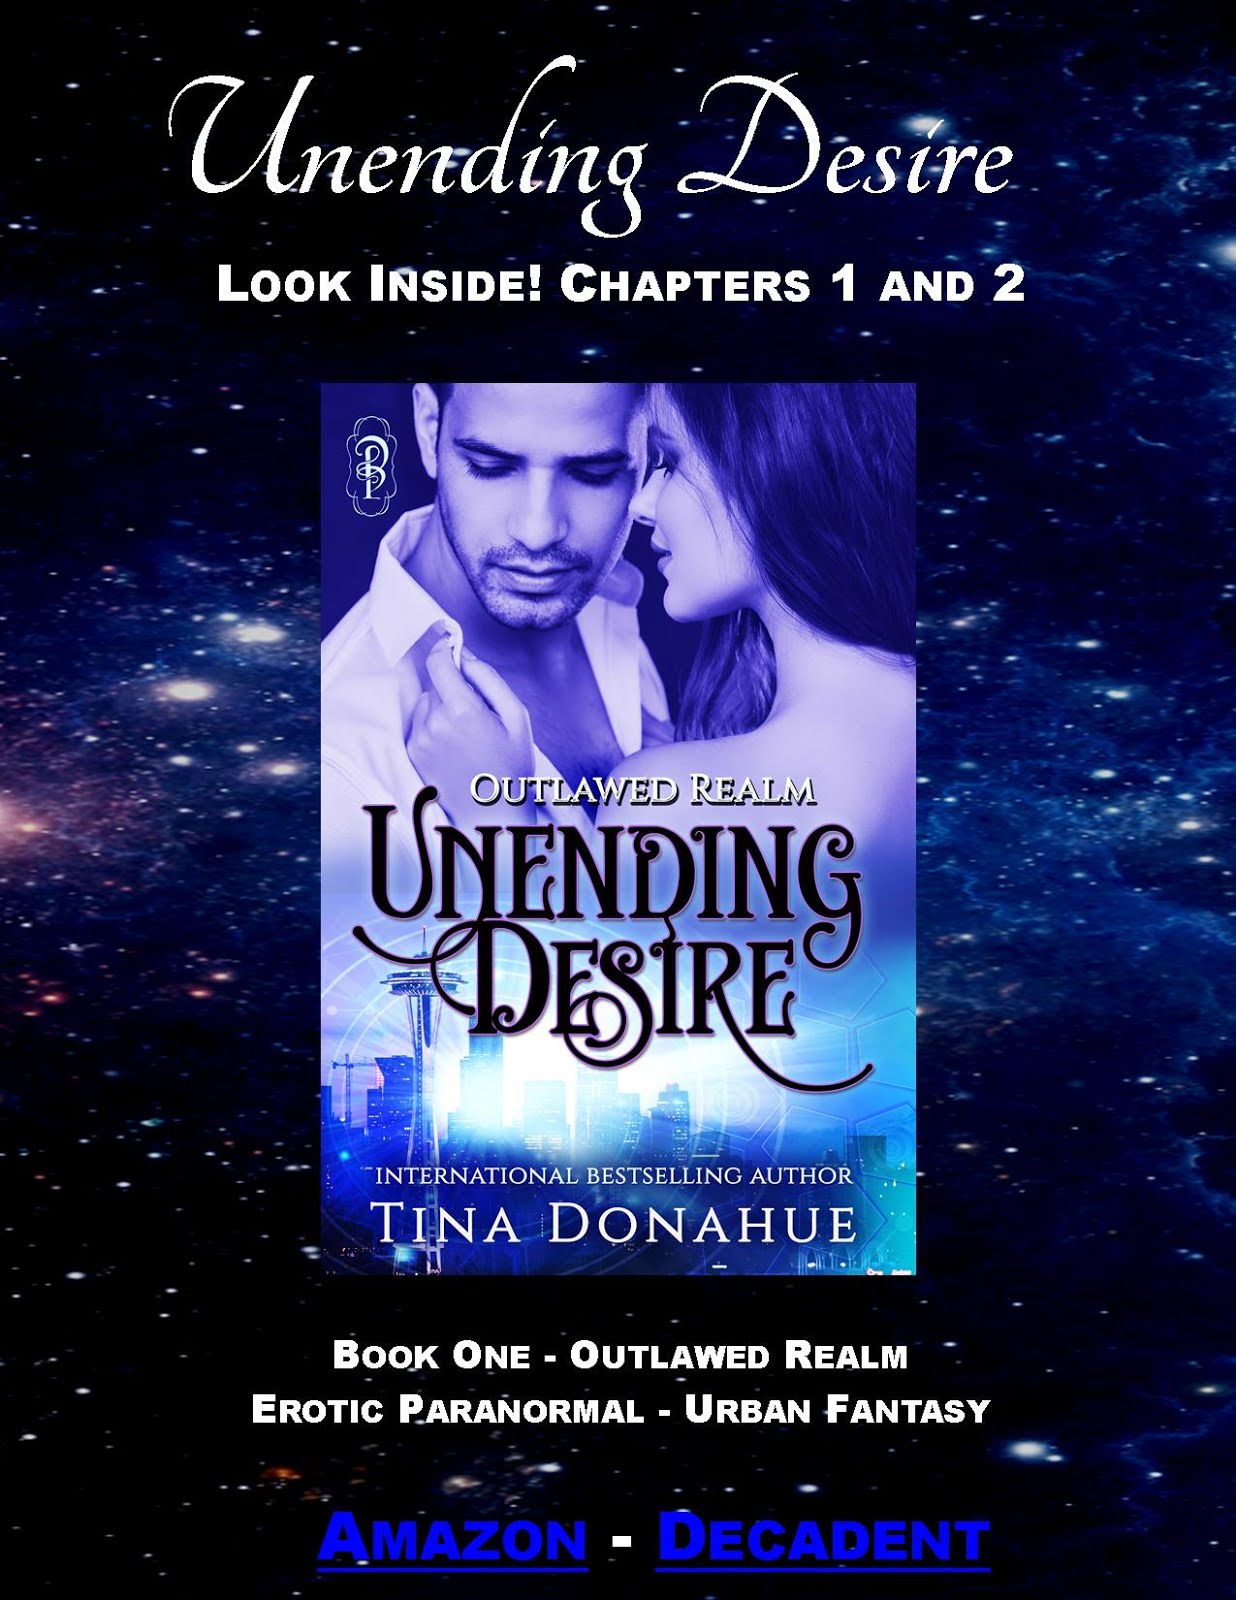 Unending Desire - Chapter 1 and 2